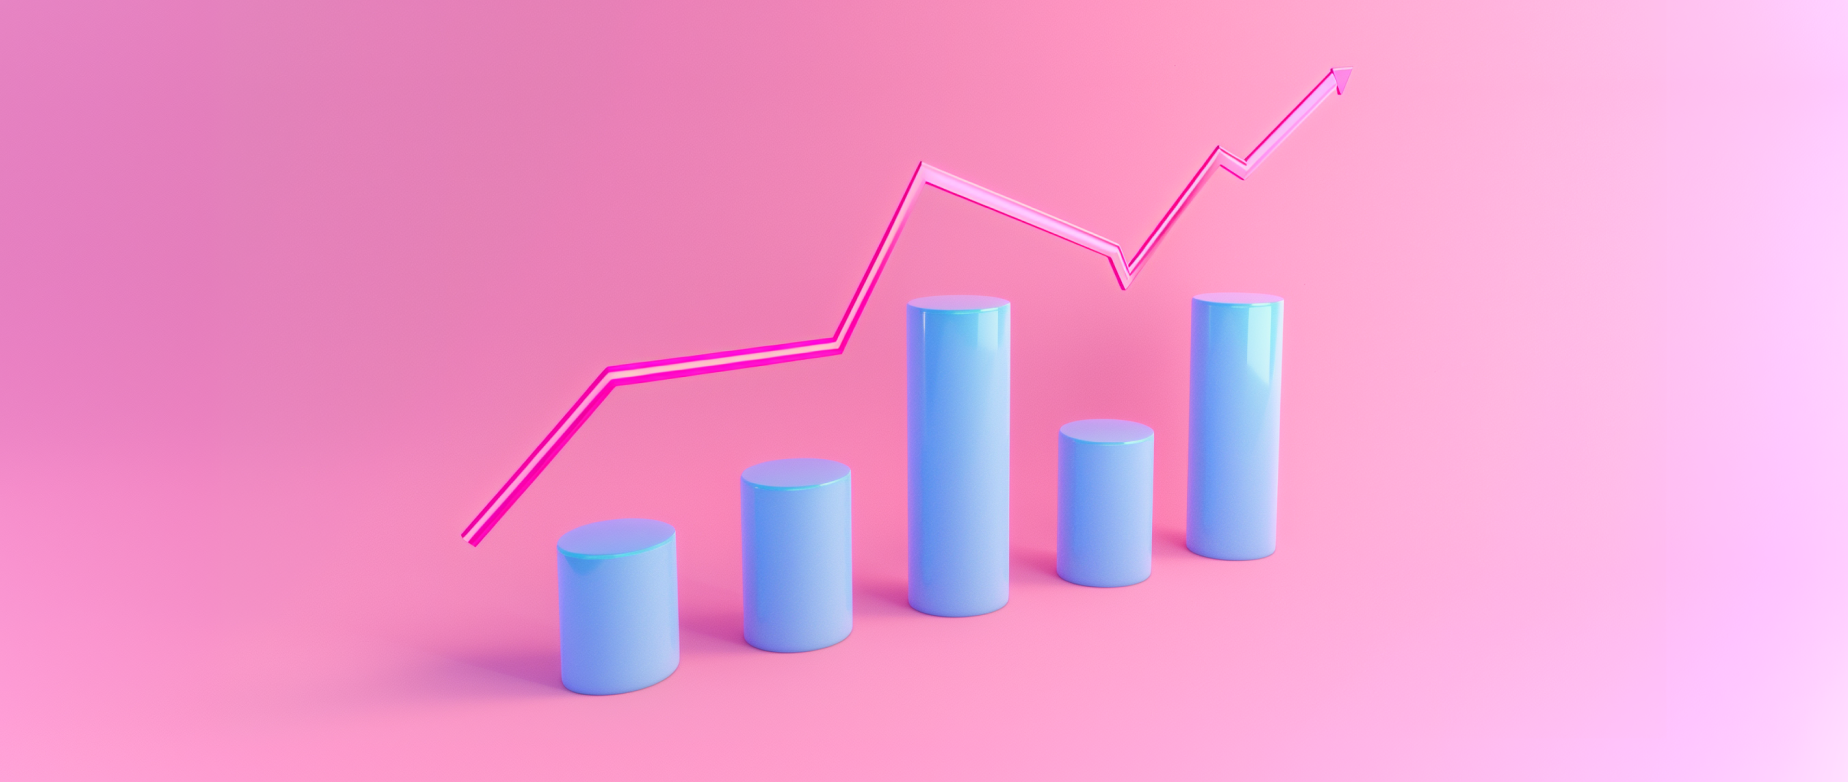 Blue cylinders of different heights below a red line graph on a pink background.